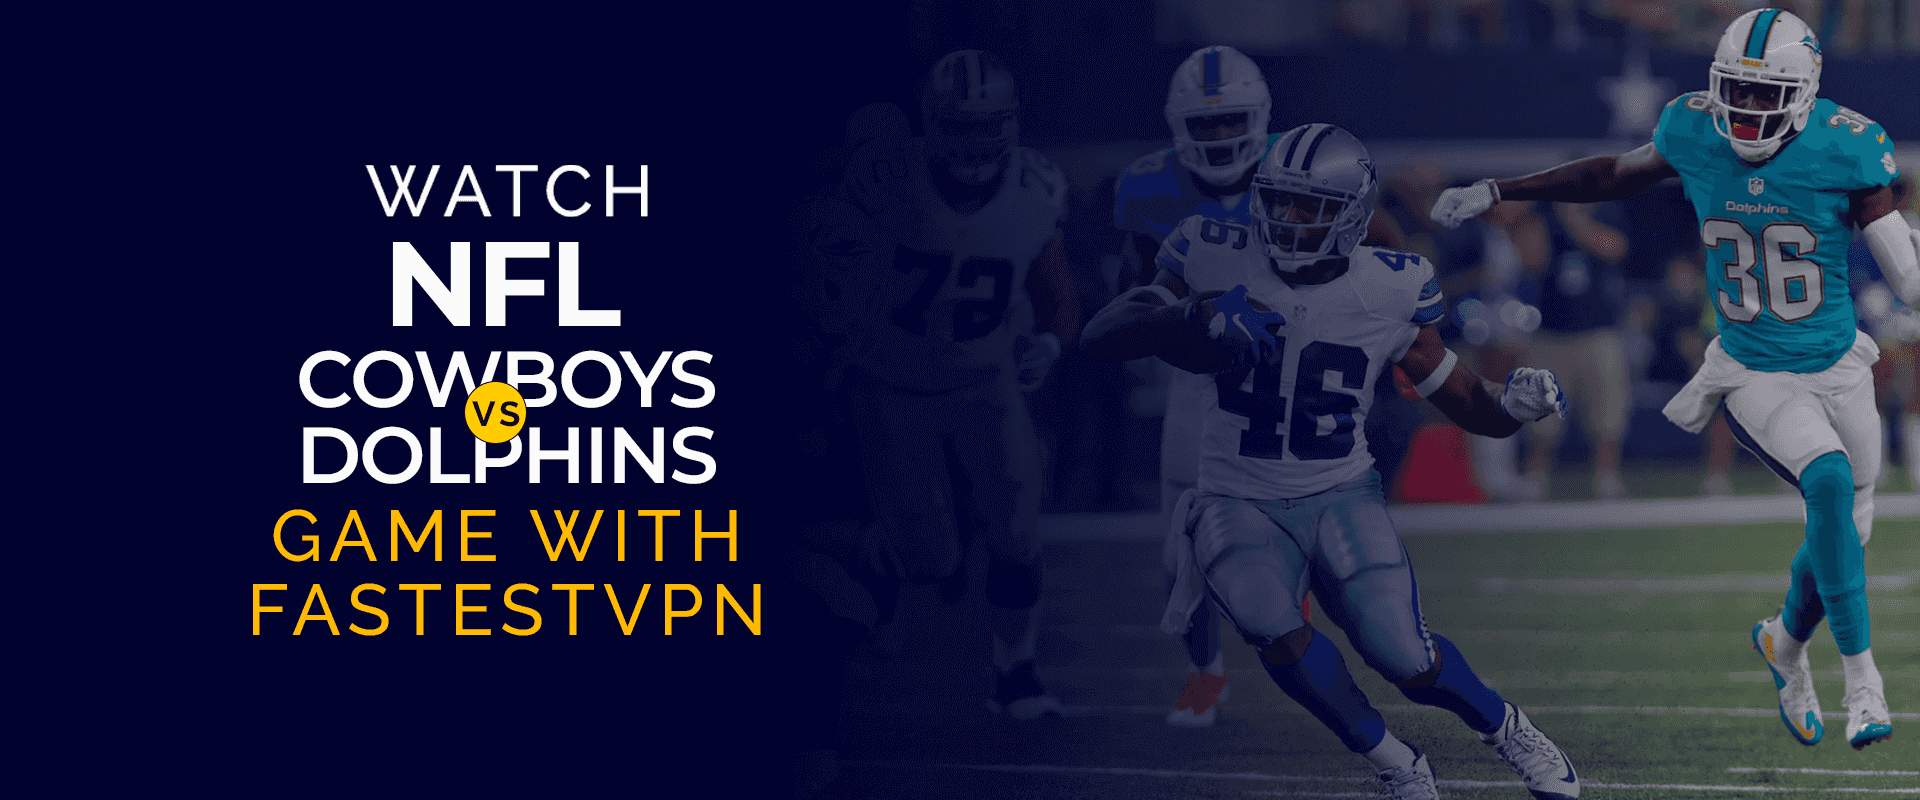 Watch NFL Cowboys vs Dolphins Game With FastestVPN